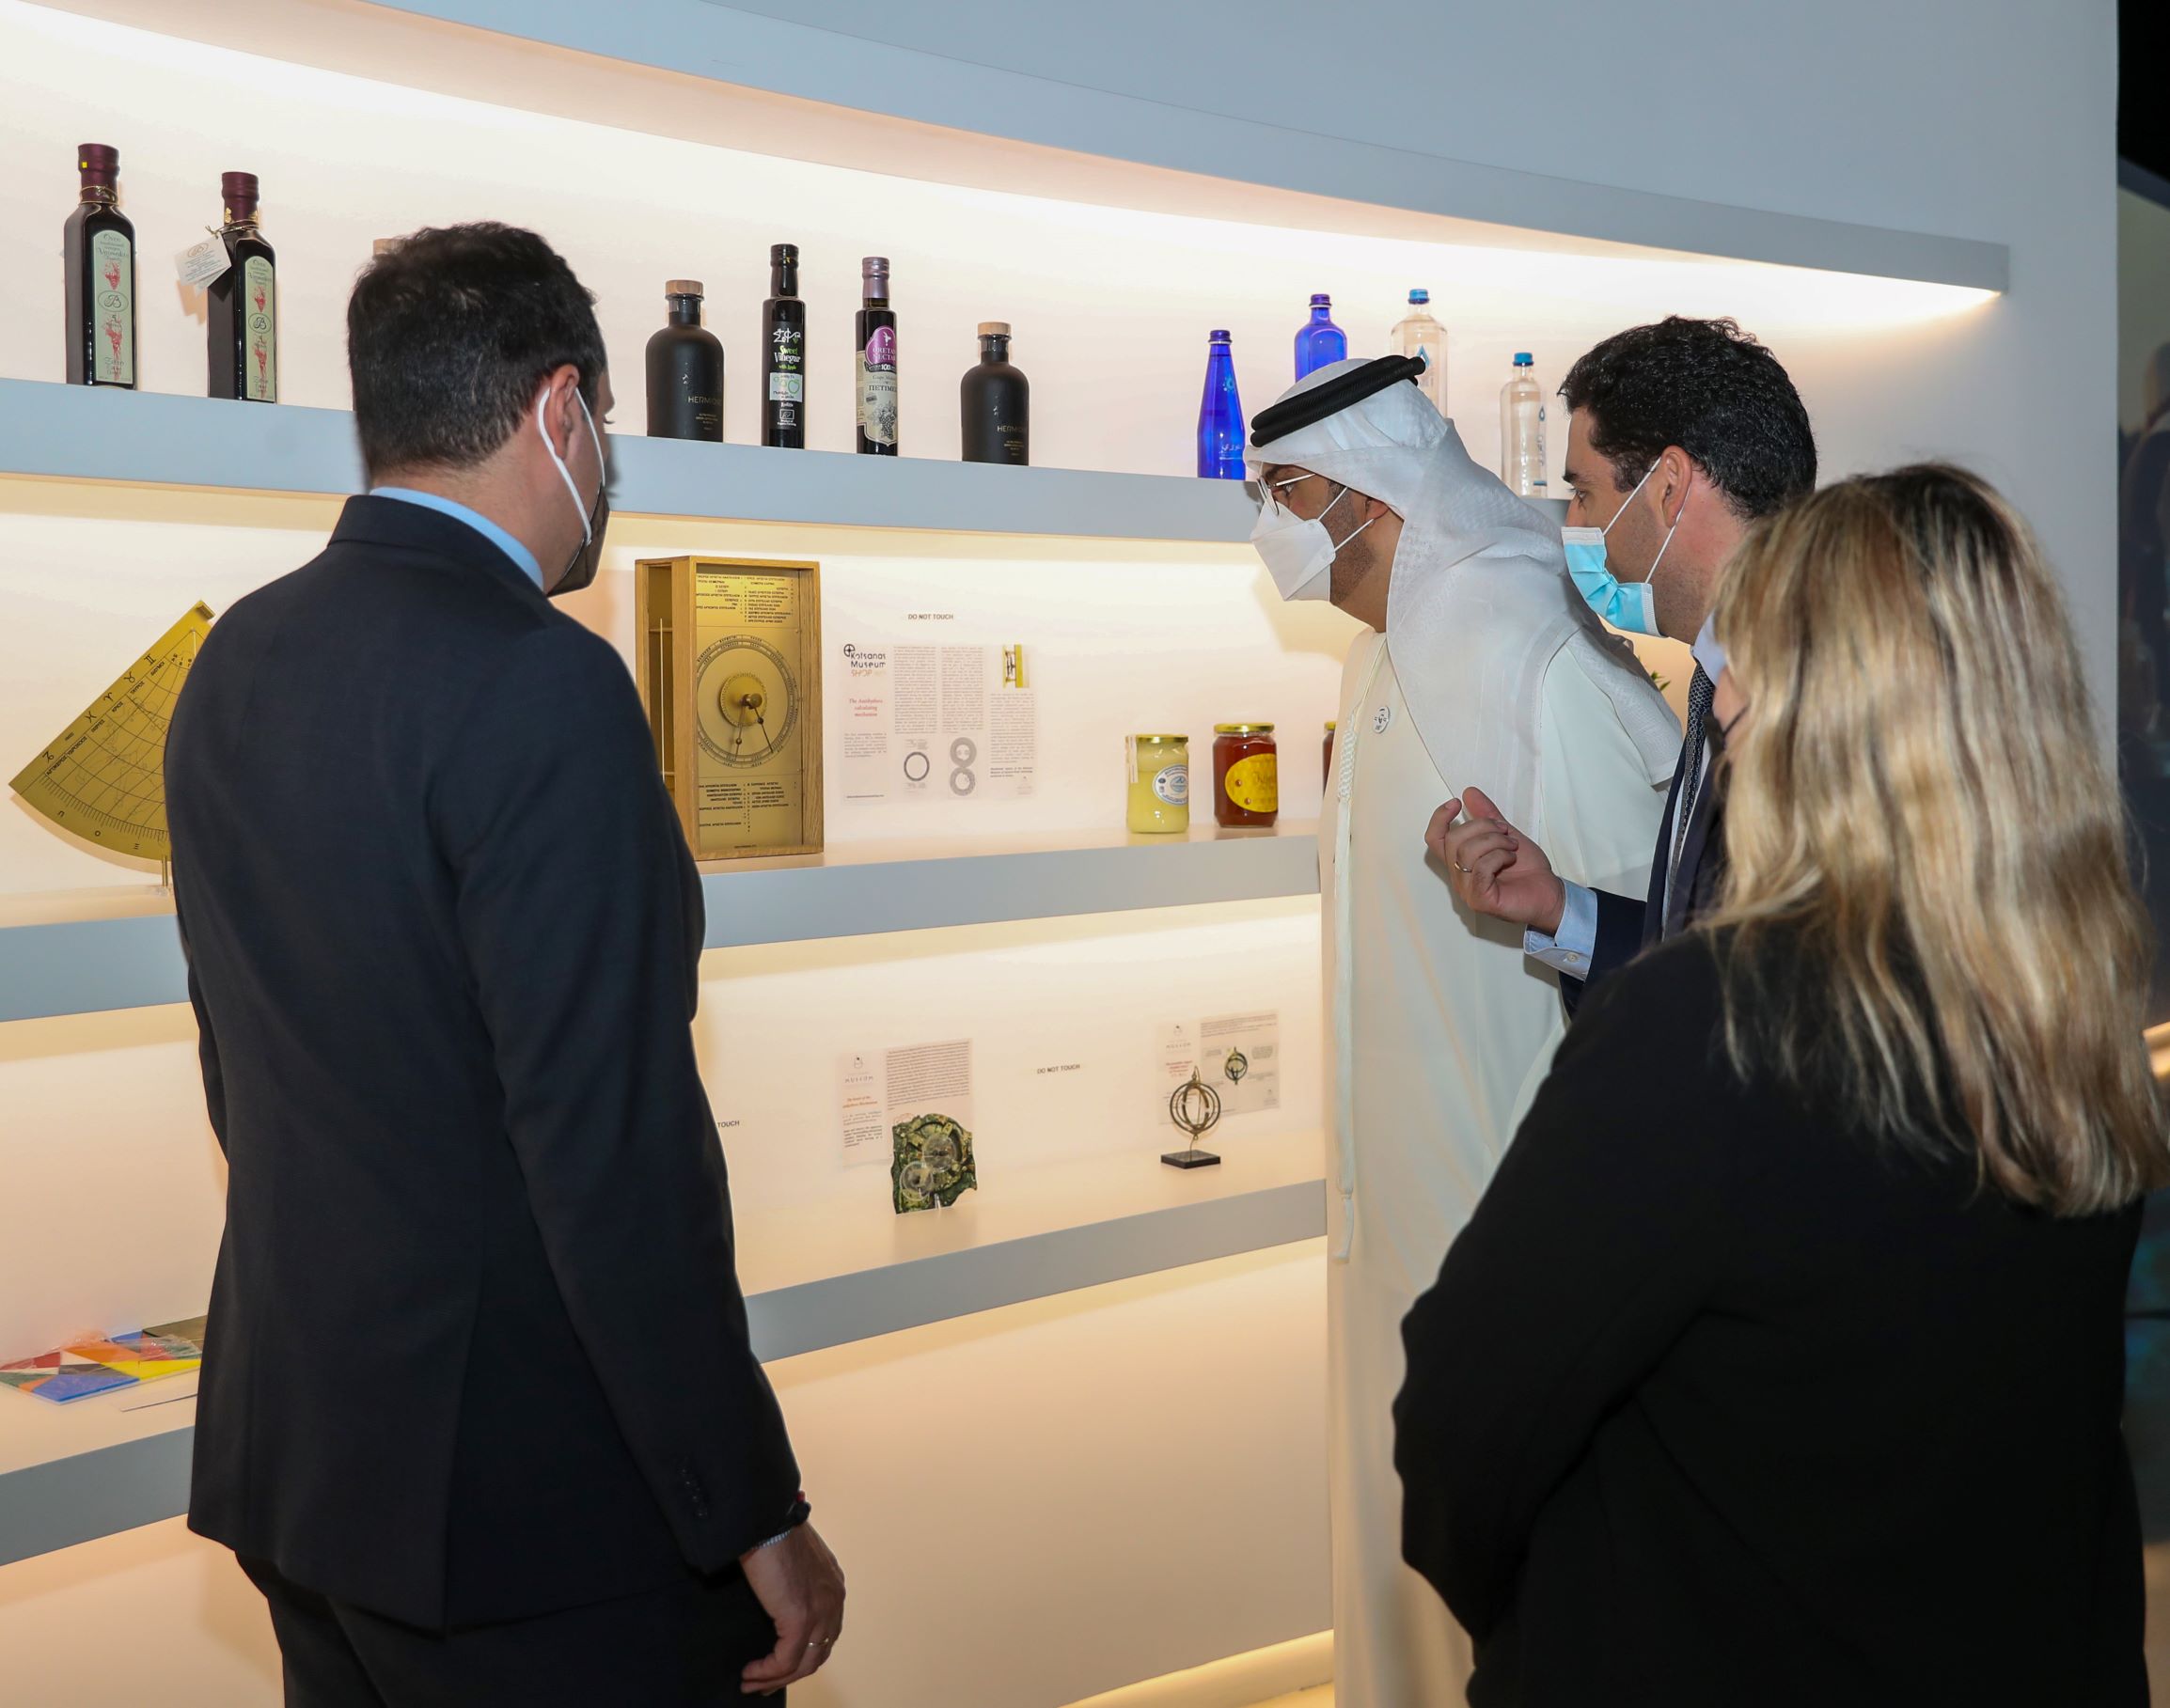 Minister of Industry and Advanced Technology Visits Greece Pavilion at Expo 2020 Dubai, Explores Innovations and Discusses Economic Opportunities